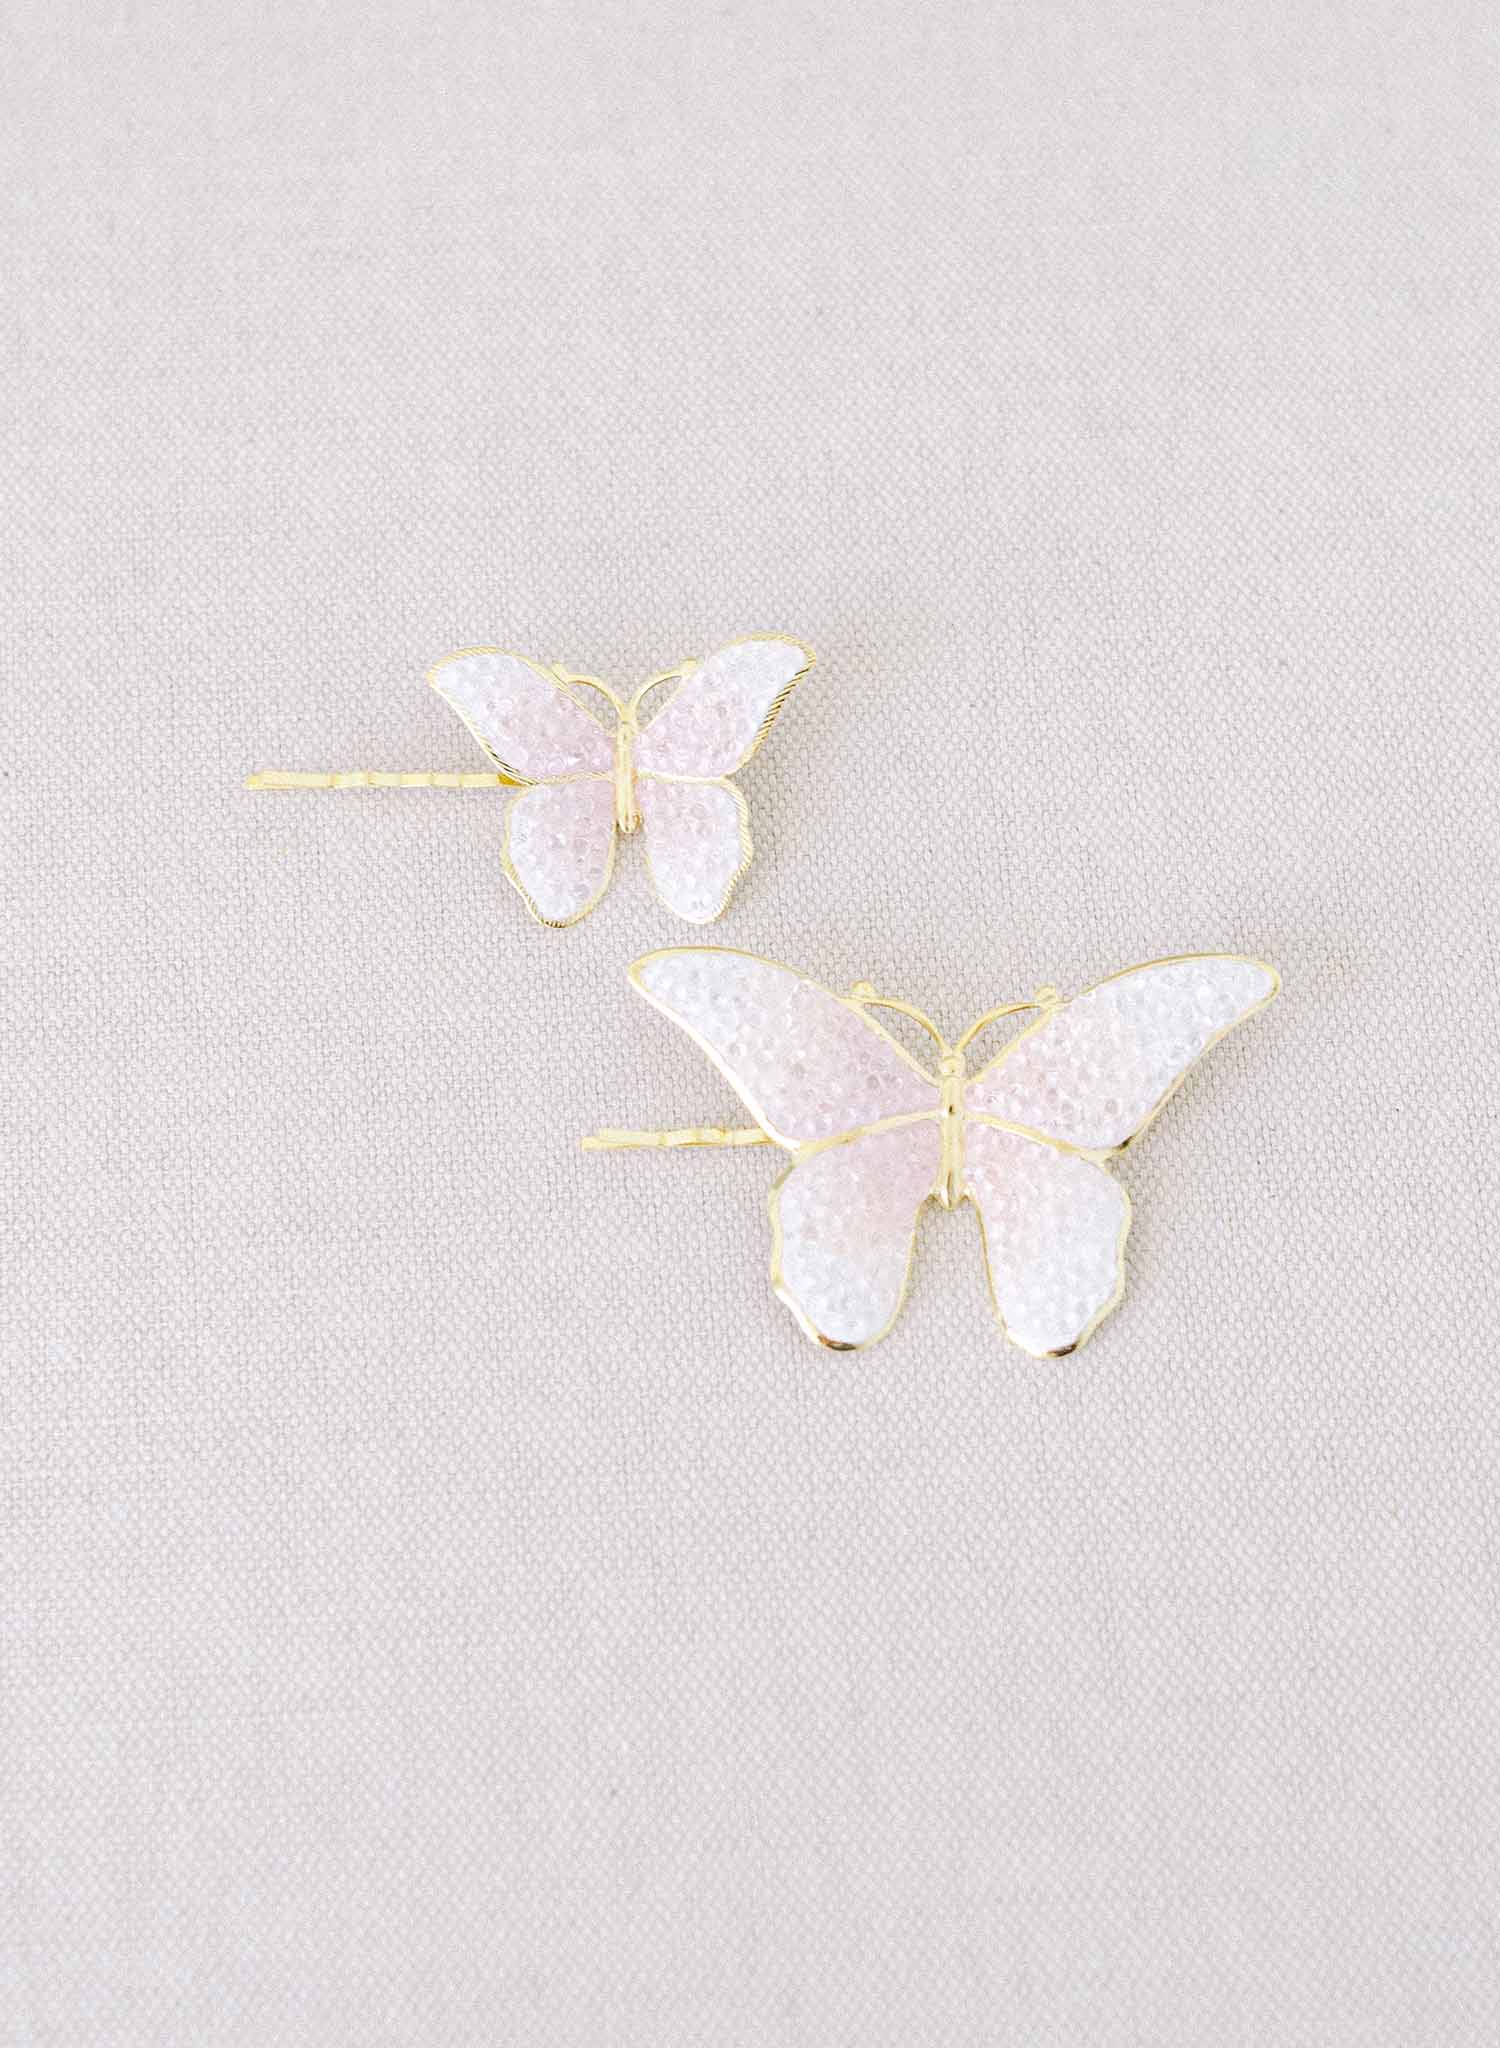 Twigs & Honey Bridal Butterfly Bobby Pins with Crystals - Glittery Crystal Butterfly Pin Set of 2 - Style #2371 Cream/Silver